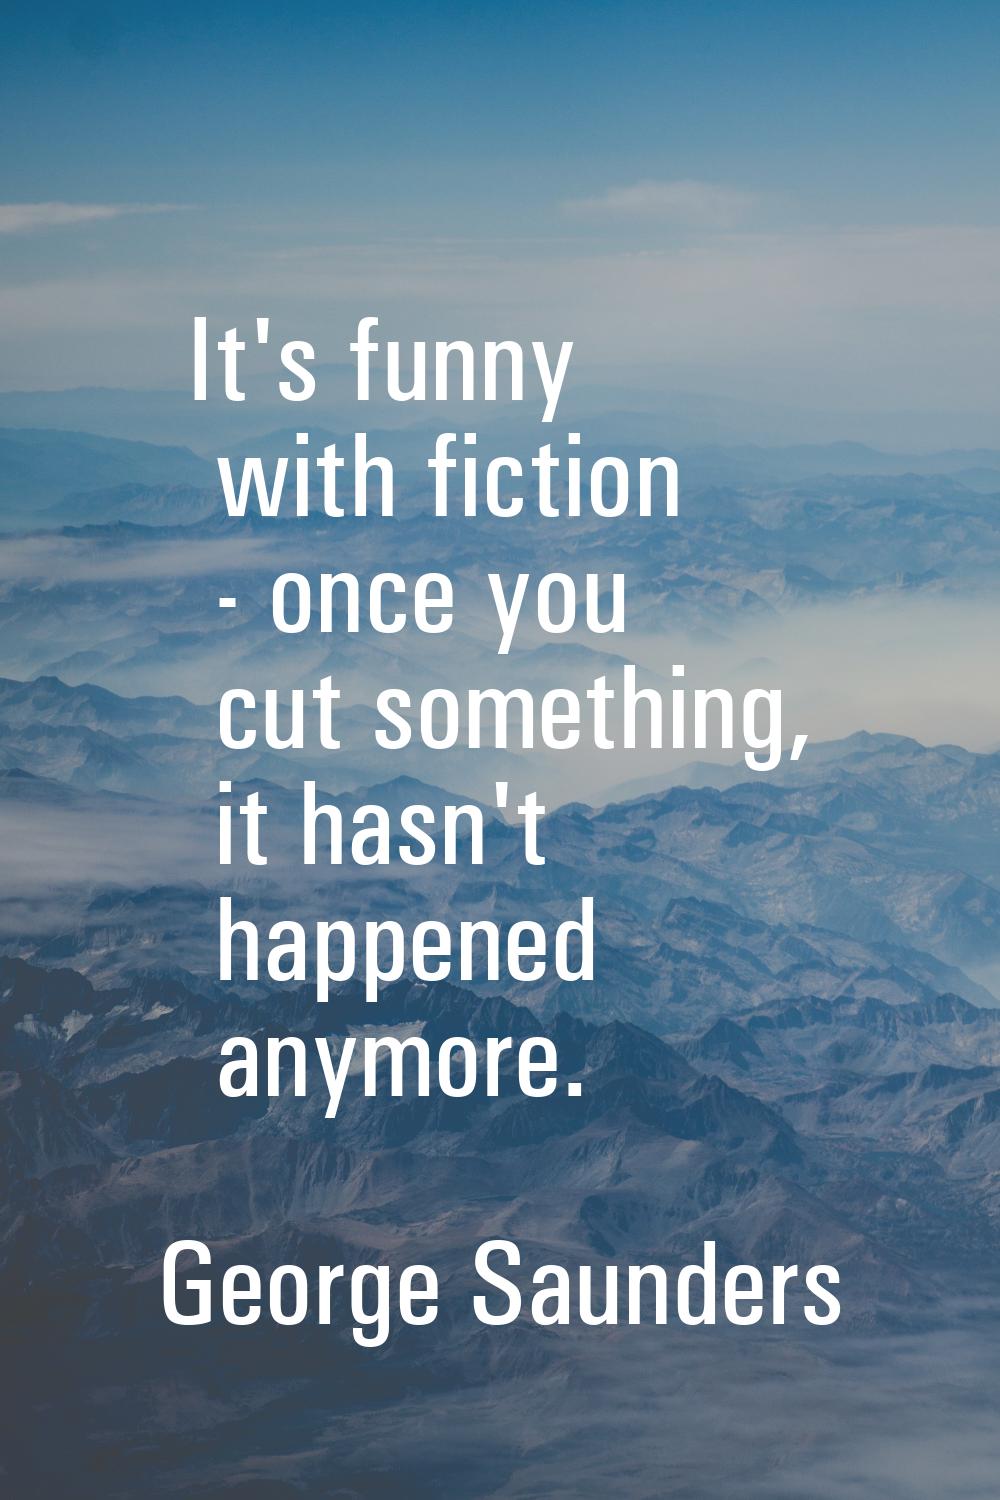 It's funny with fiction - once you cut something, it hasn't happened anymore.